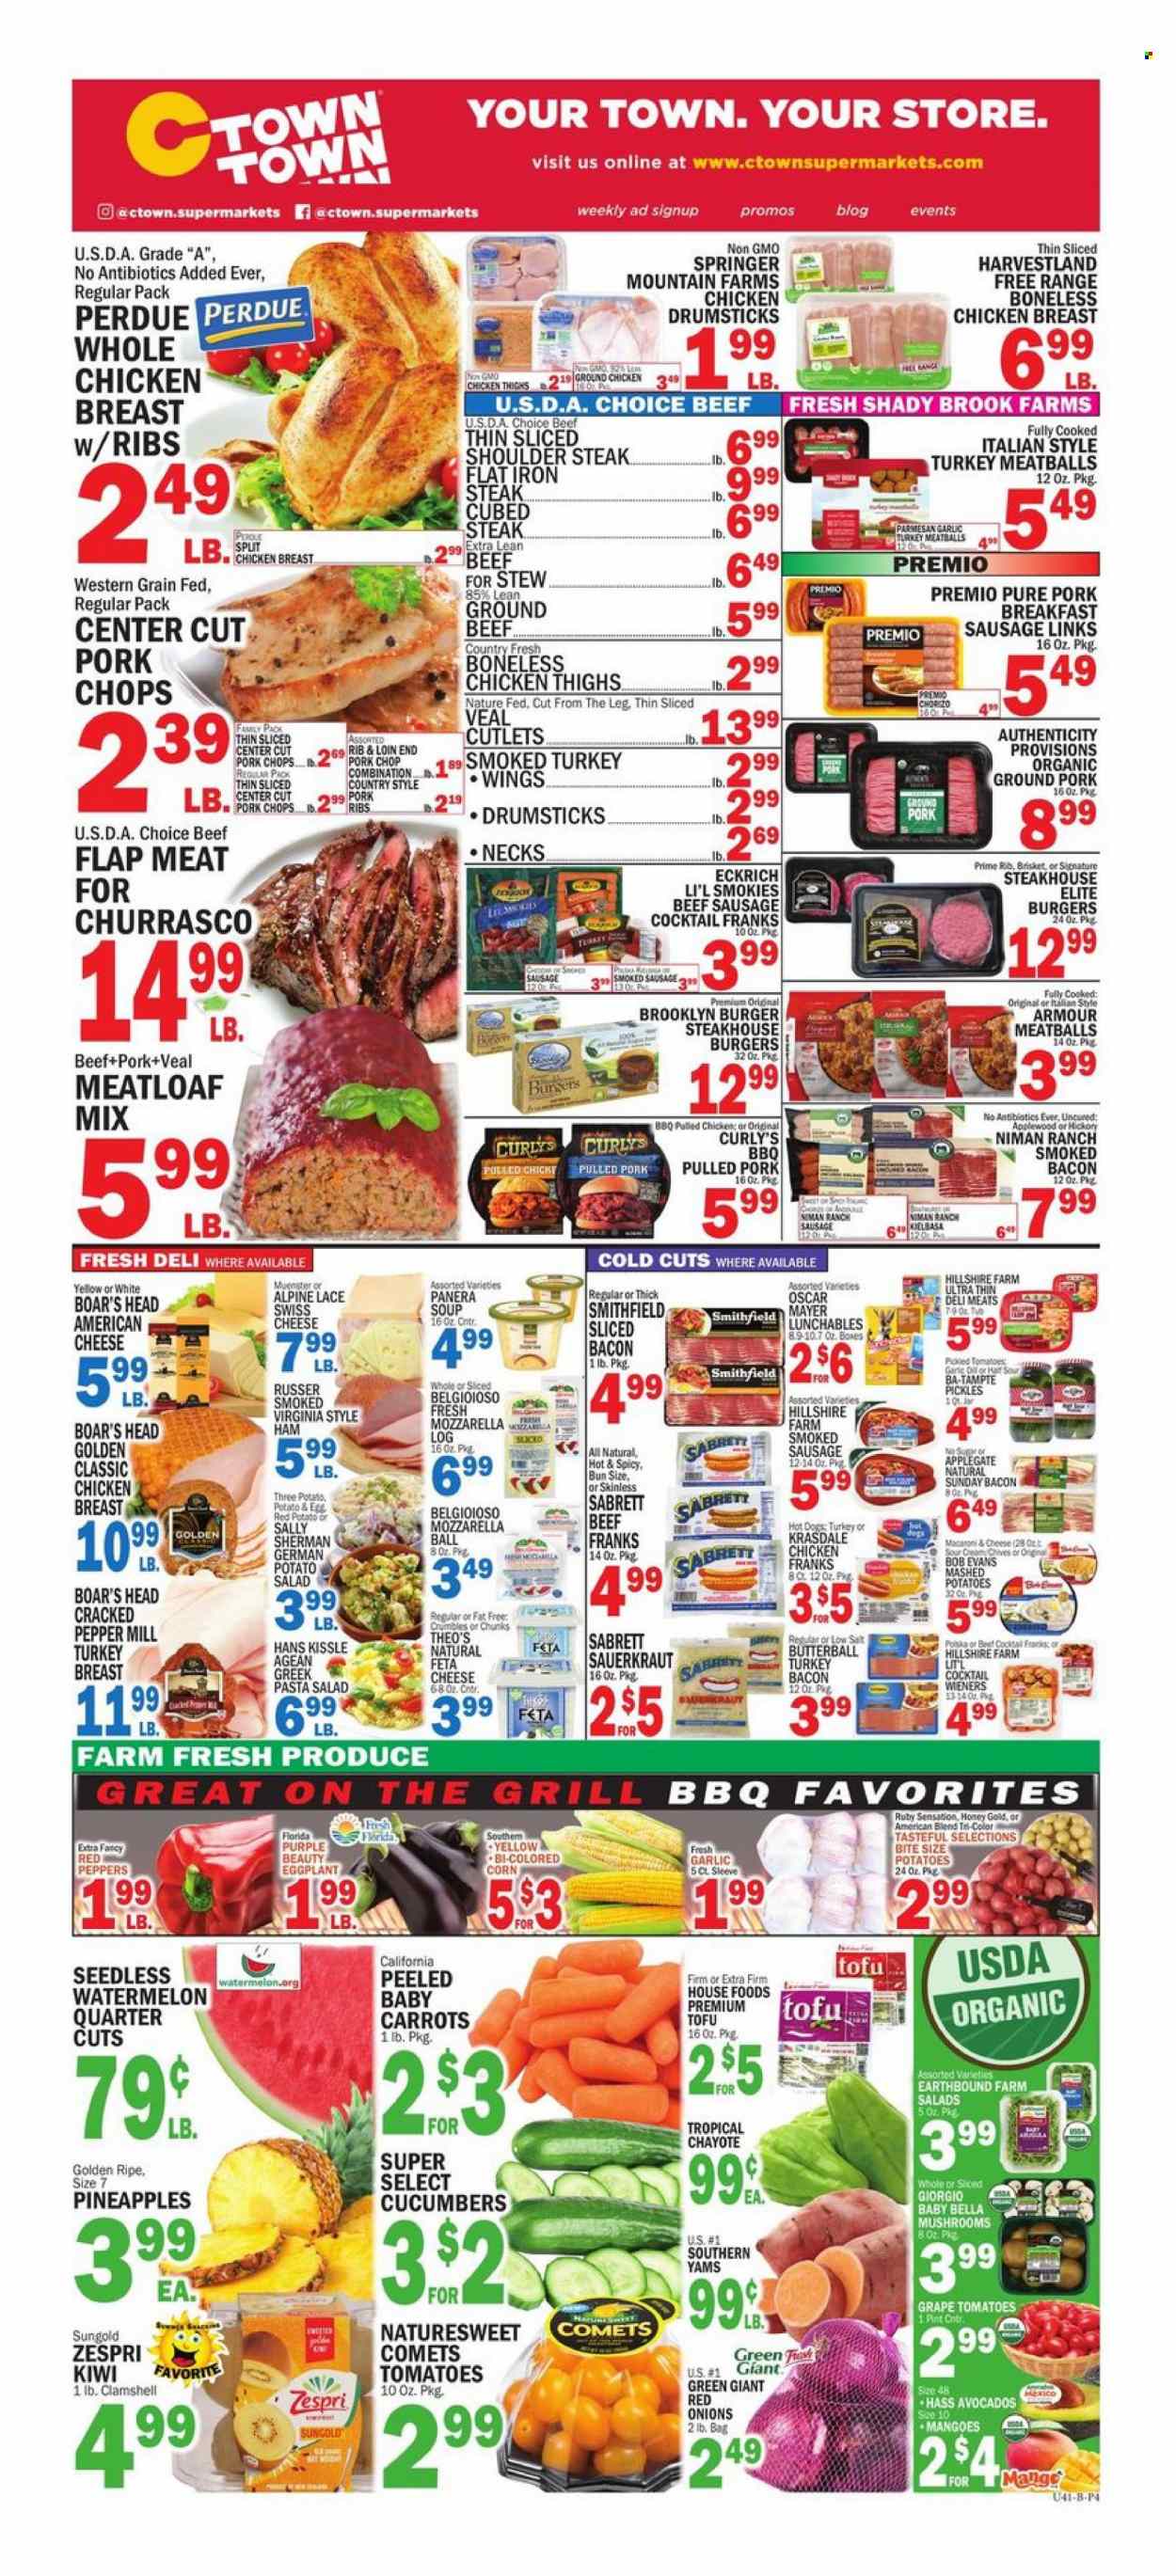 thumbnail - C-Town Flyer - 06/02/2023 - 06/08/2023 - Sales products - mushrooms, stew meat, macaroons, arugula, carrots, corn, cucumber, garlic, red onions, onion, salad, peppers, eggplant, red peppers, chives, avocado, kiwi, watermelon, pineapple, chayote, mashed potatoes, hot dog, meatballs, soup, hamburger, pasta, meatloaf, Perdue®, Lunchables, Bob Evans, pulled pork, pulled chicken, brisket, Boar's Head, bacon, Butterball, turkey bacon, ham, Hillshire Farm, Oscar Mayer, sausage, smoked sausage, chicken frankfurters, frankfurters, potato salad, pasta salad, american cheese, swiss cheese, parmesan, Münster cheese, feta, tofu, eggs, sour cream, sauerkraut, pickles, pickled cabbage, honey, cocktail, beer, ground chicken, whole chicken, chicken breasts, chicken thighs, chicken drumsticks, turkey, beef meat, ground beef, steak, top blade, ribs, ground pork, pork chops, pork meat, pork ribs. Page 5.